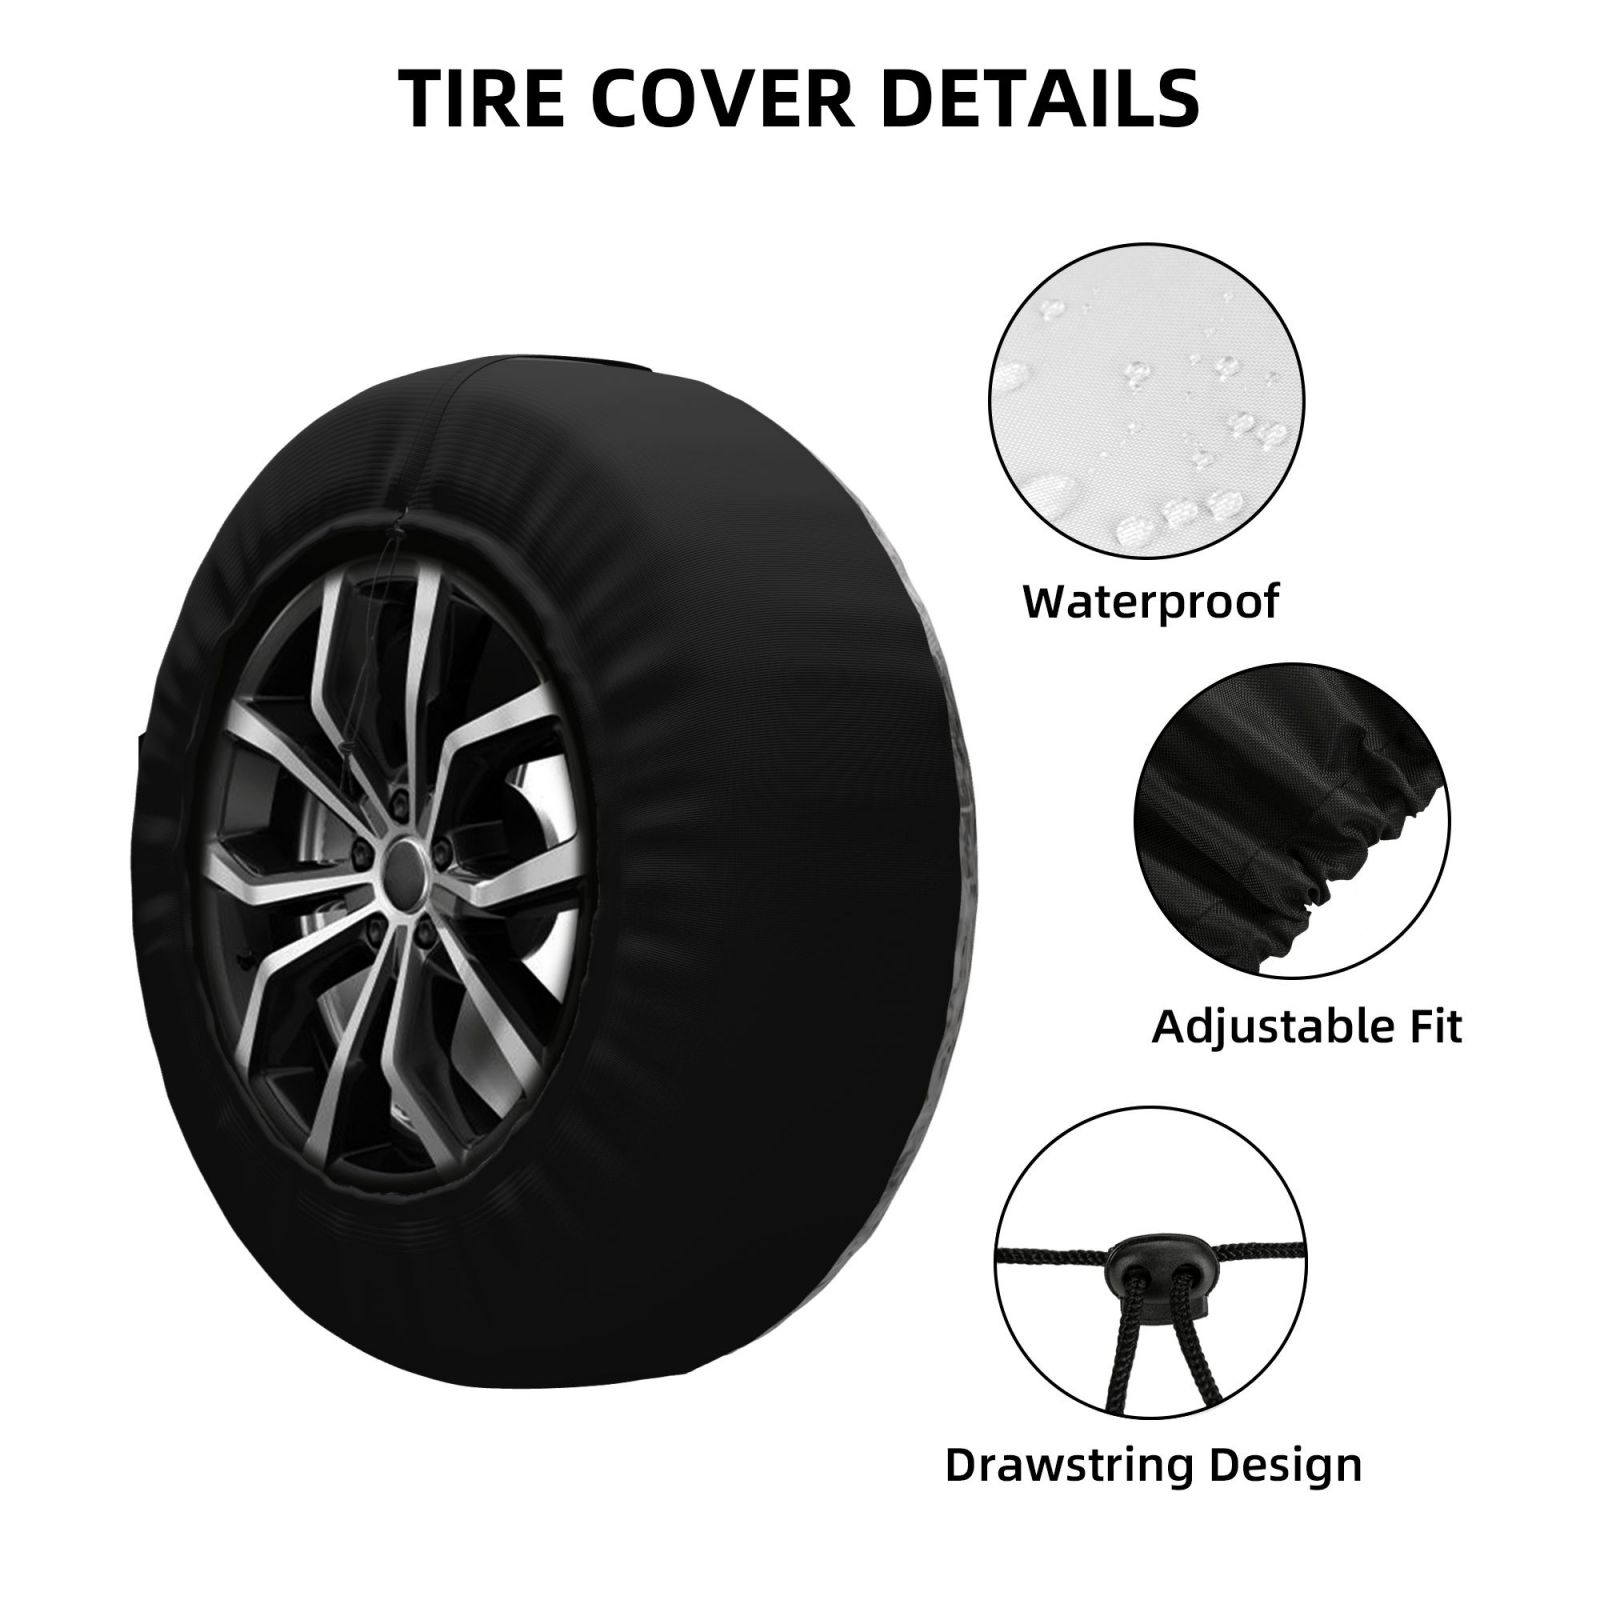 I Hate Pulling Out Spare Tire Cover Wheel Covers for RV Tires Camper Tire Cover Protectors for Trailer Rv SUV Truck Travel Trailer - 3